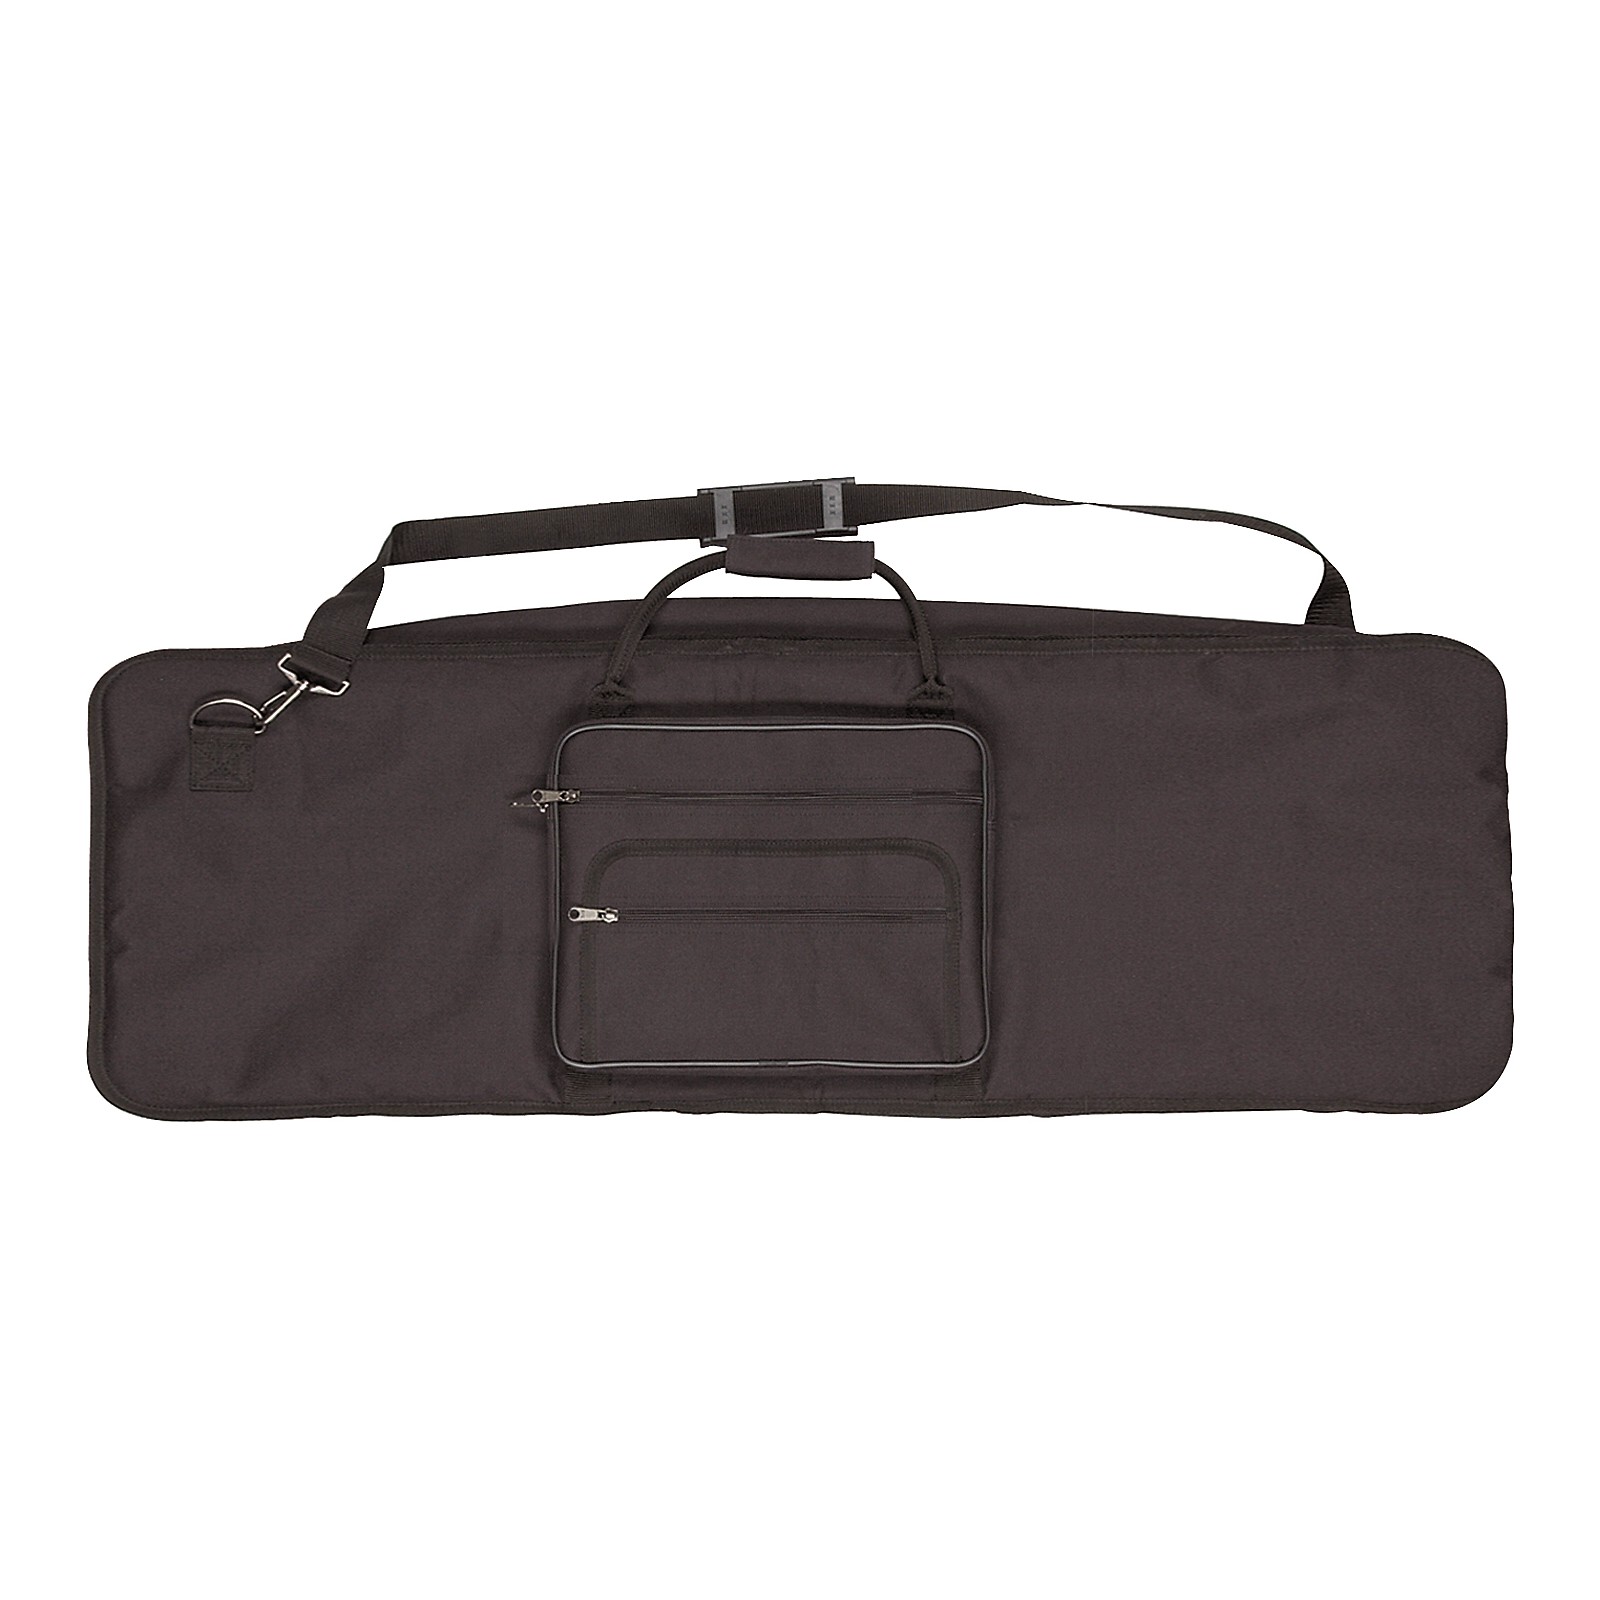 Rockville Travel Case Soft Carry Bag For 49 Key Music Controllers Keyboards 